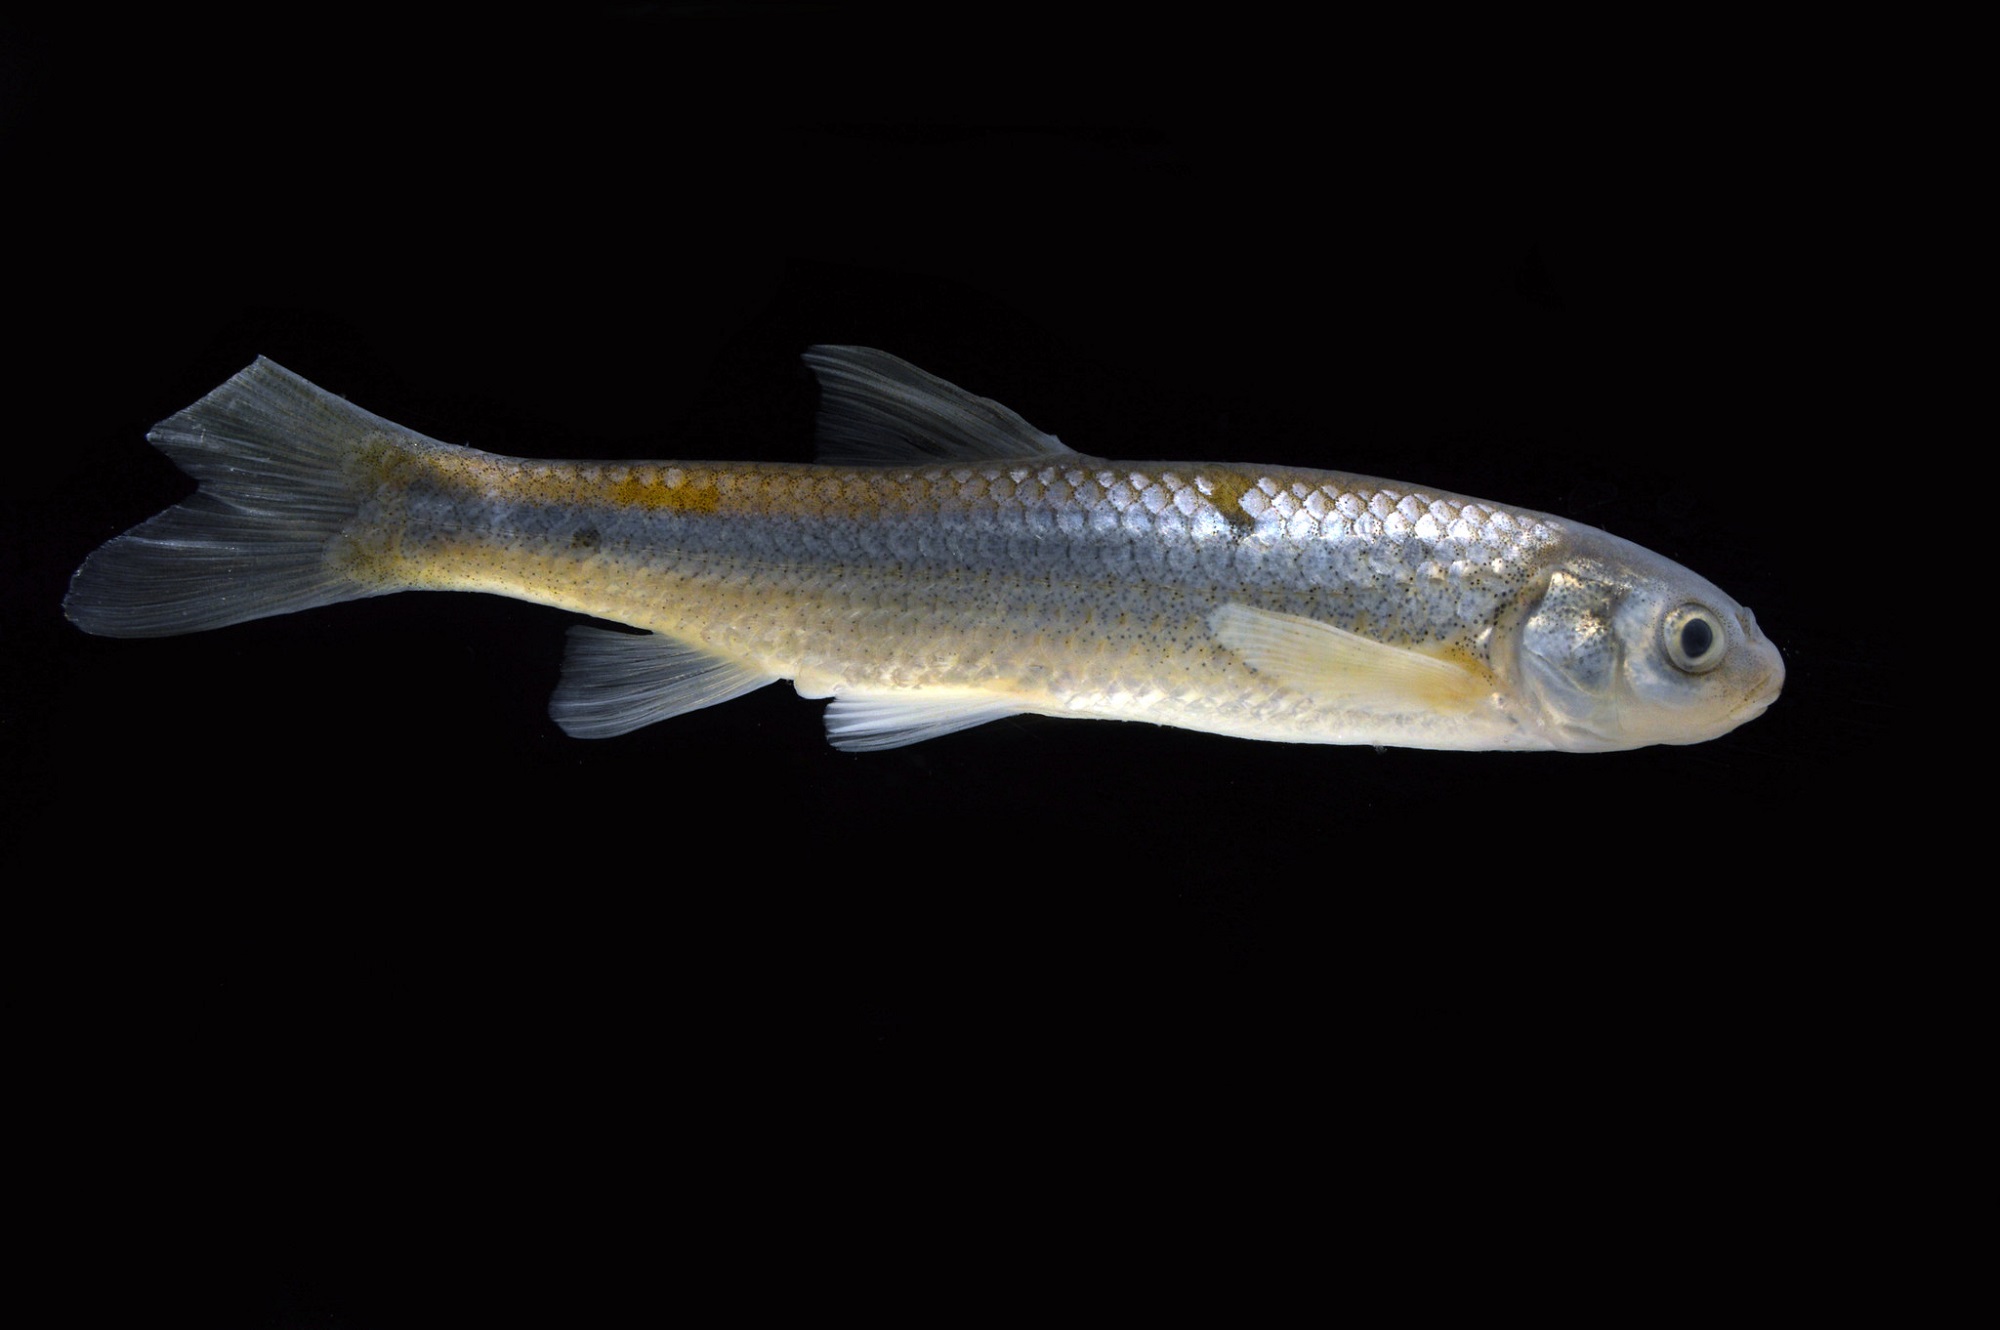 An endangered fish’s story follows the vanishing waters of the Rio Grande